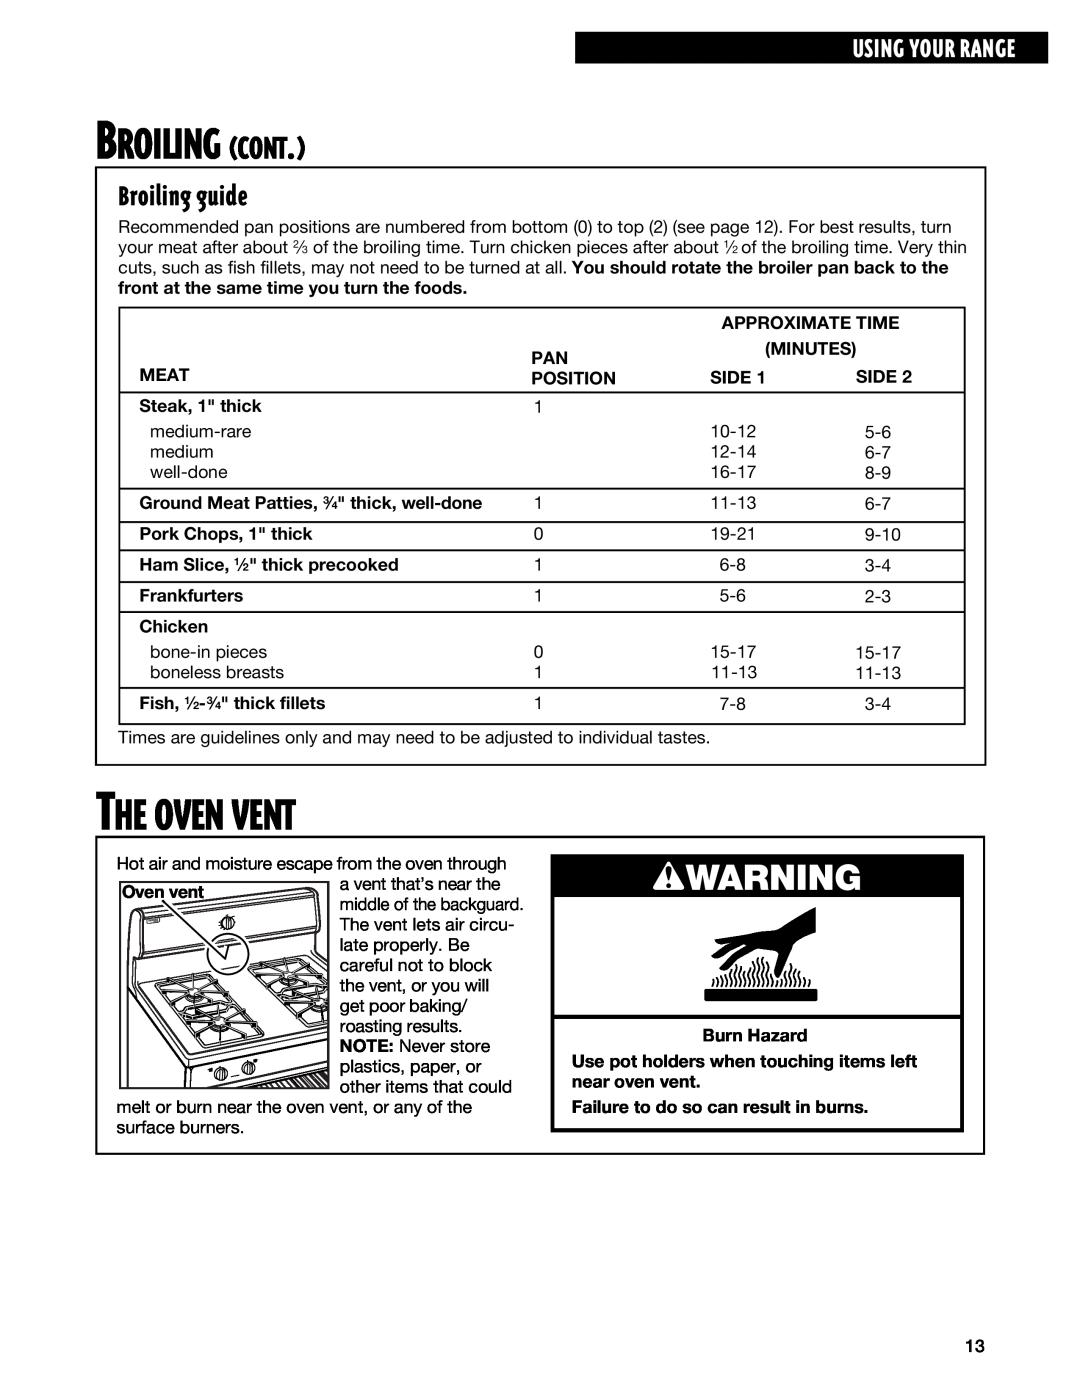 Whirlpool TGP325E manual Broiling Cont, The Oven Vent, Broiling guide, wWARNING, Using Your Range 